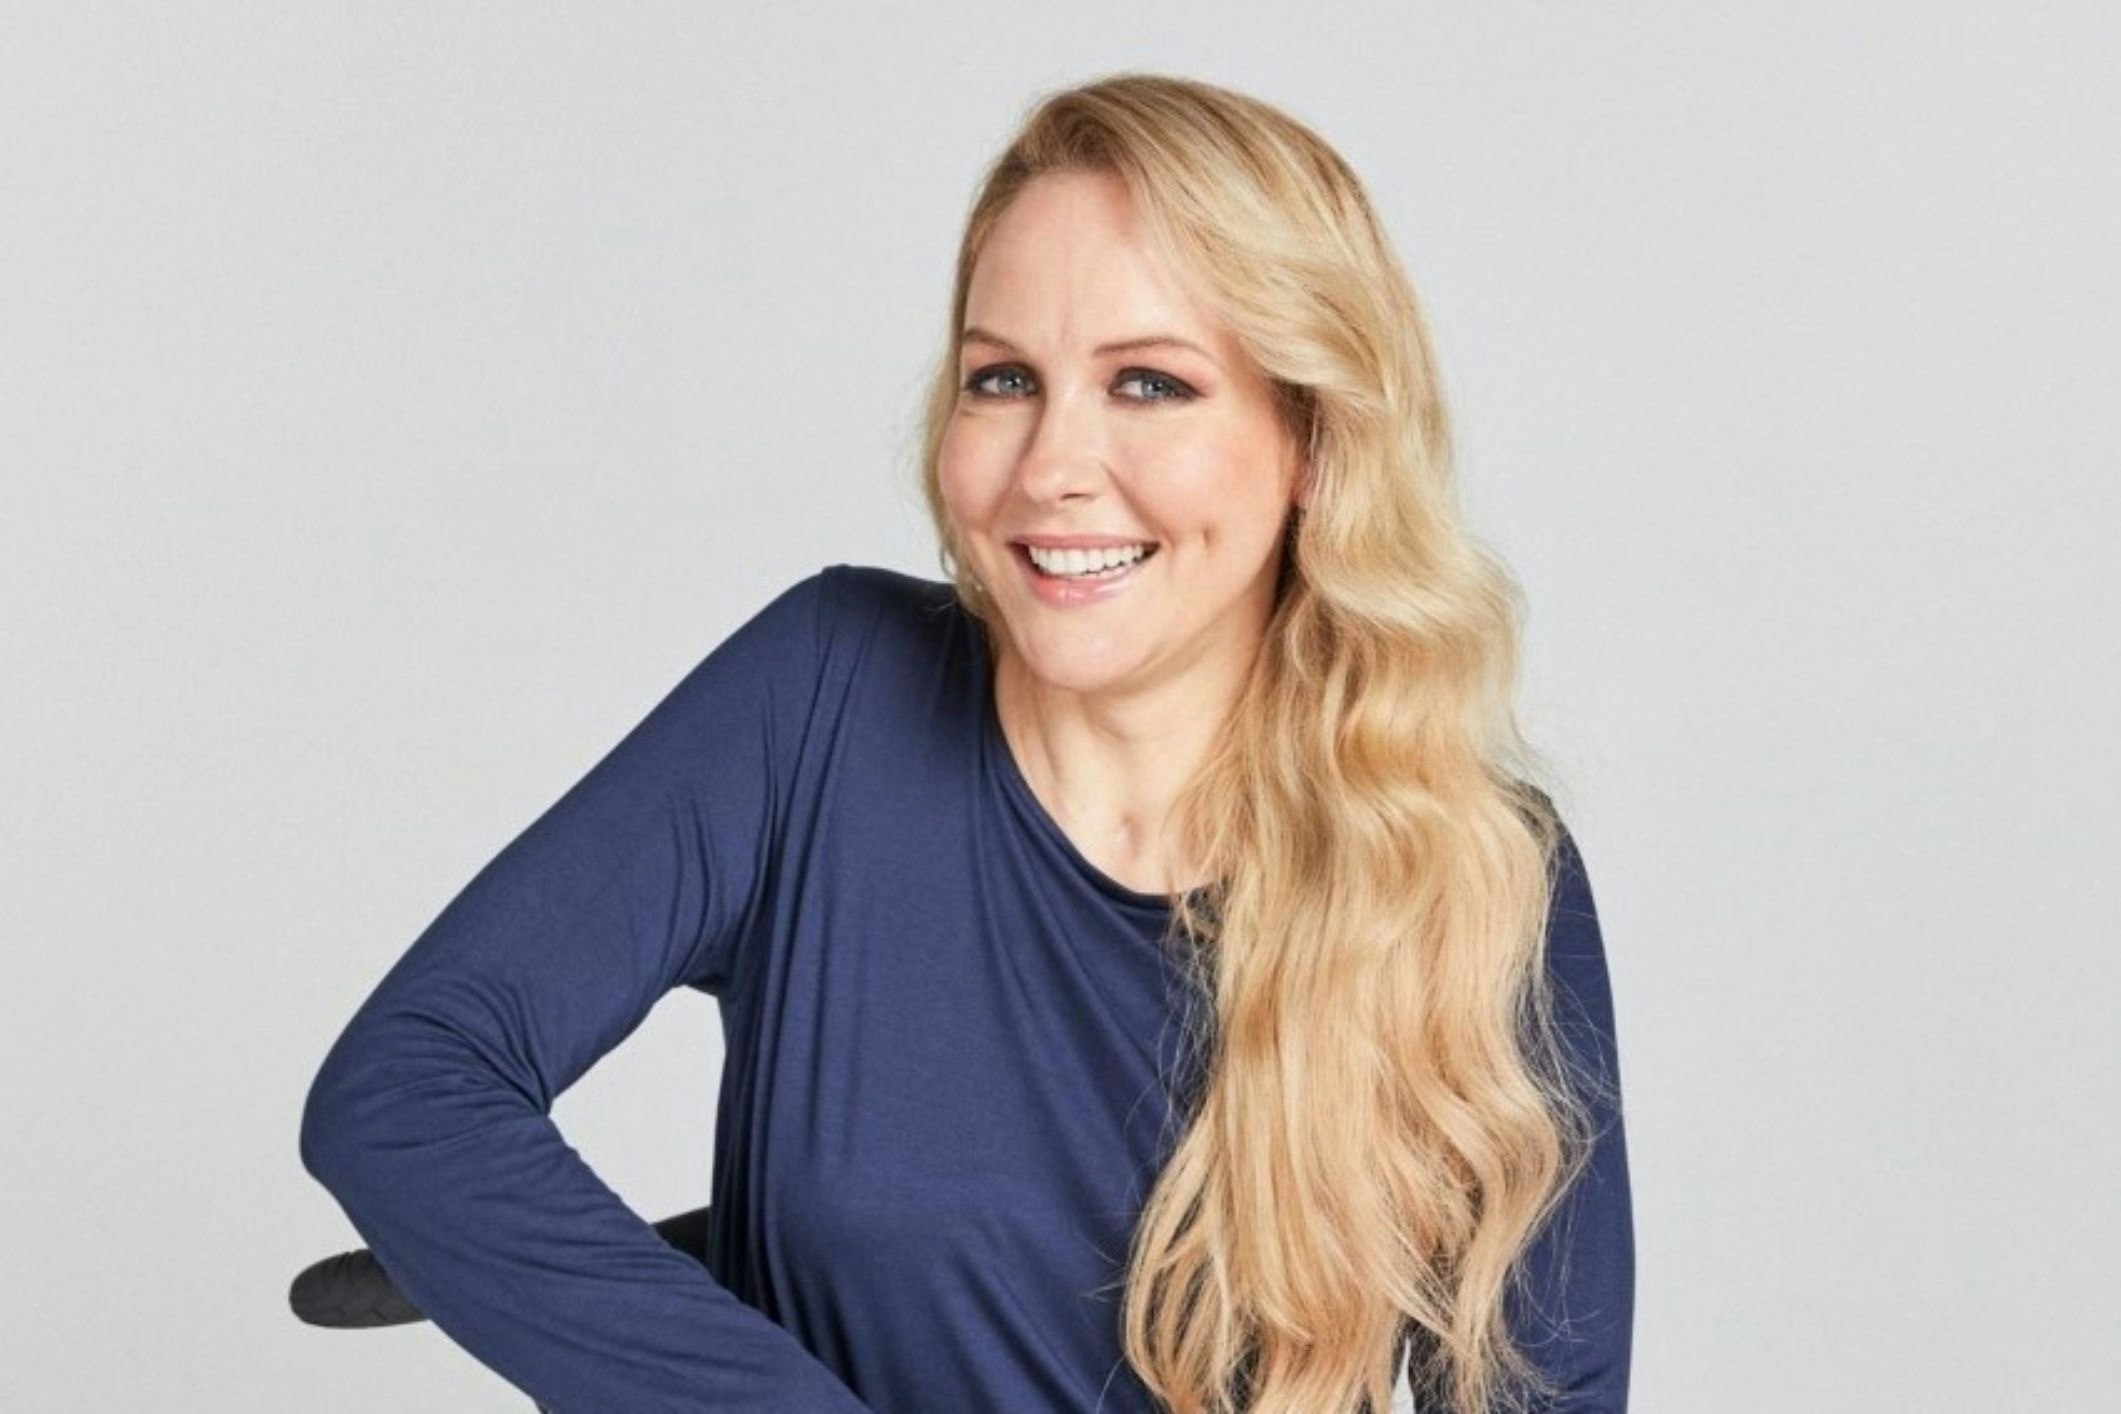 <p>Lisa Cox has seven recommendations for the advertising, media and communications world, based on her experience as the Disability Affairs Officer at Media Diversity Australia. [Source: Newshub]</p>
